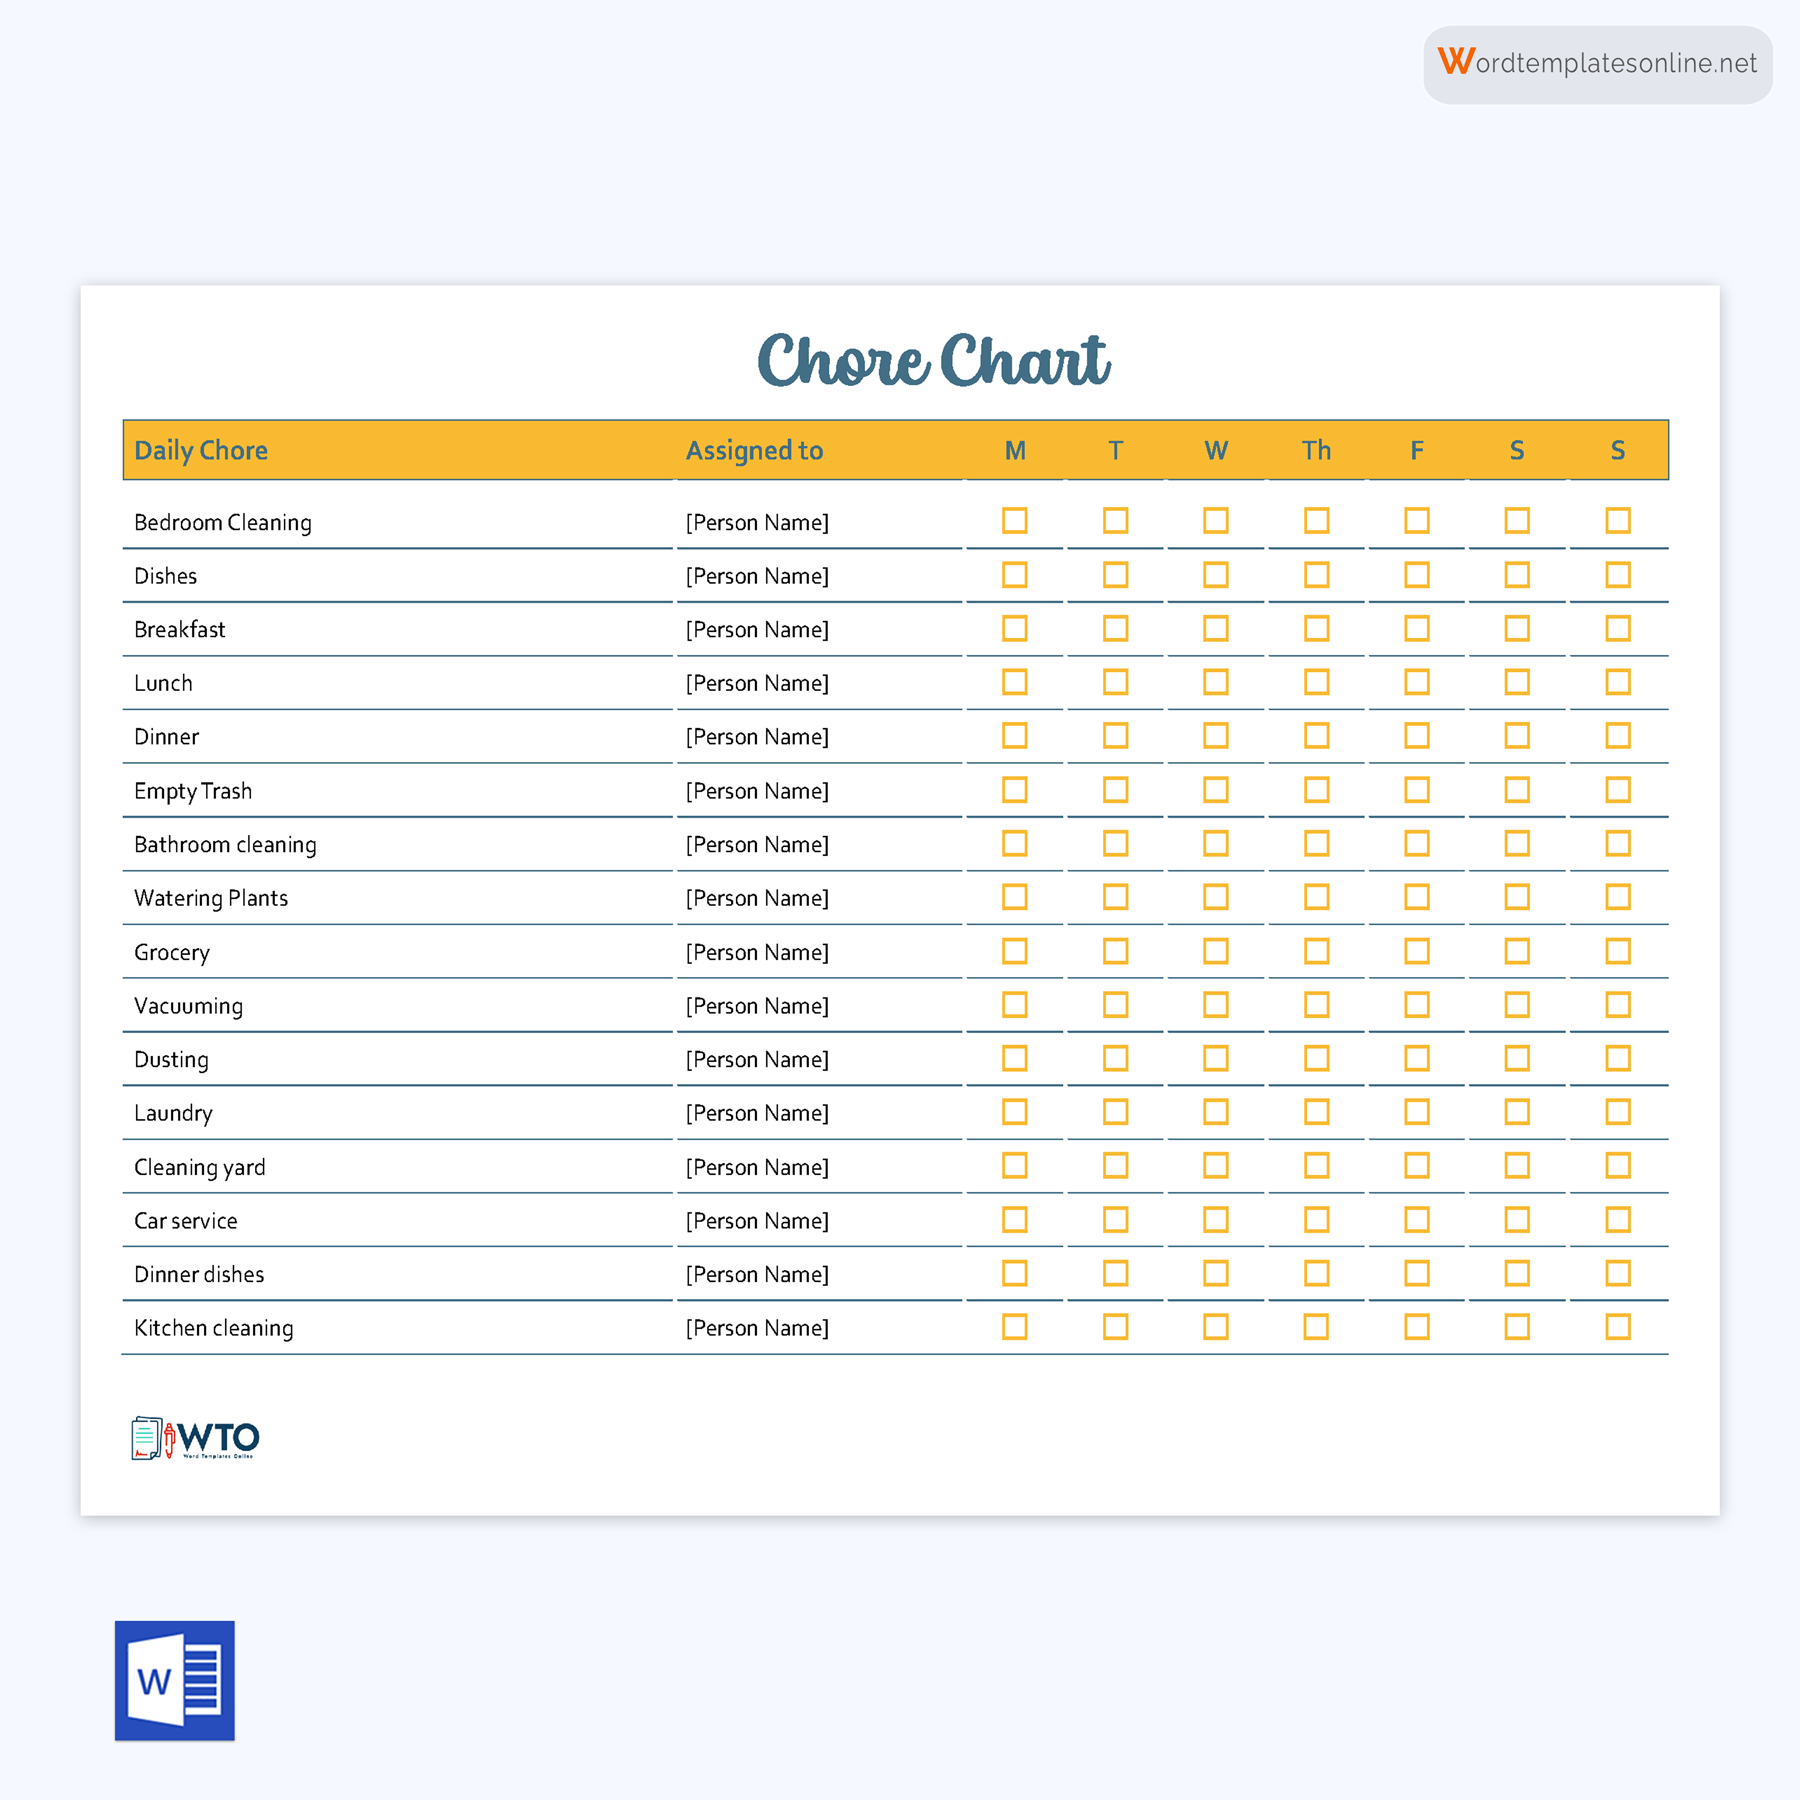 Personalized Chore Chart Sample: Organize Your Tasks